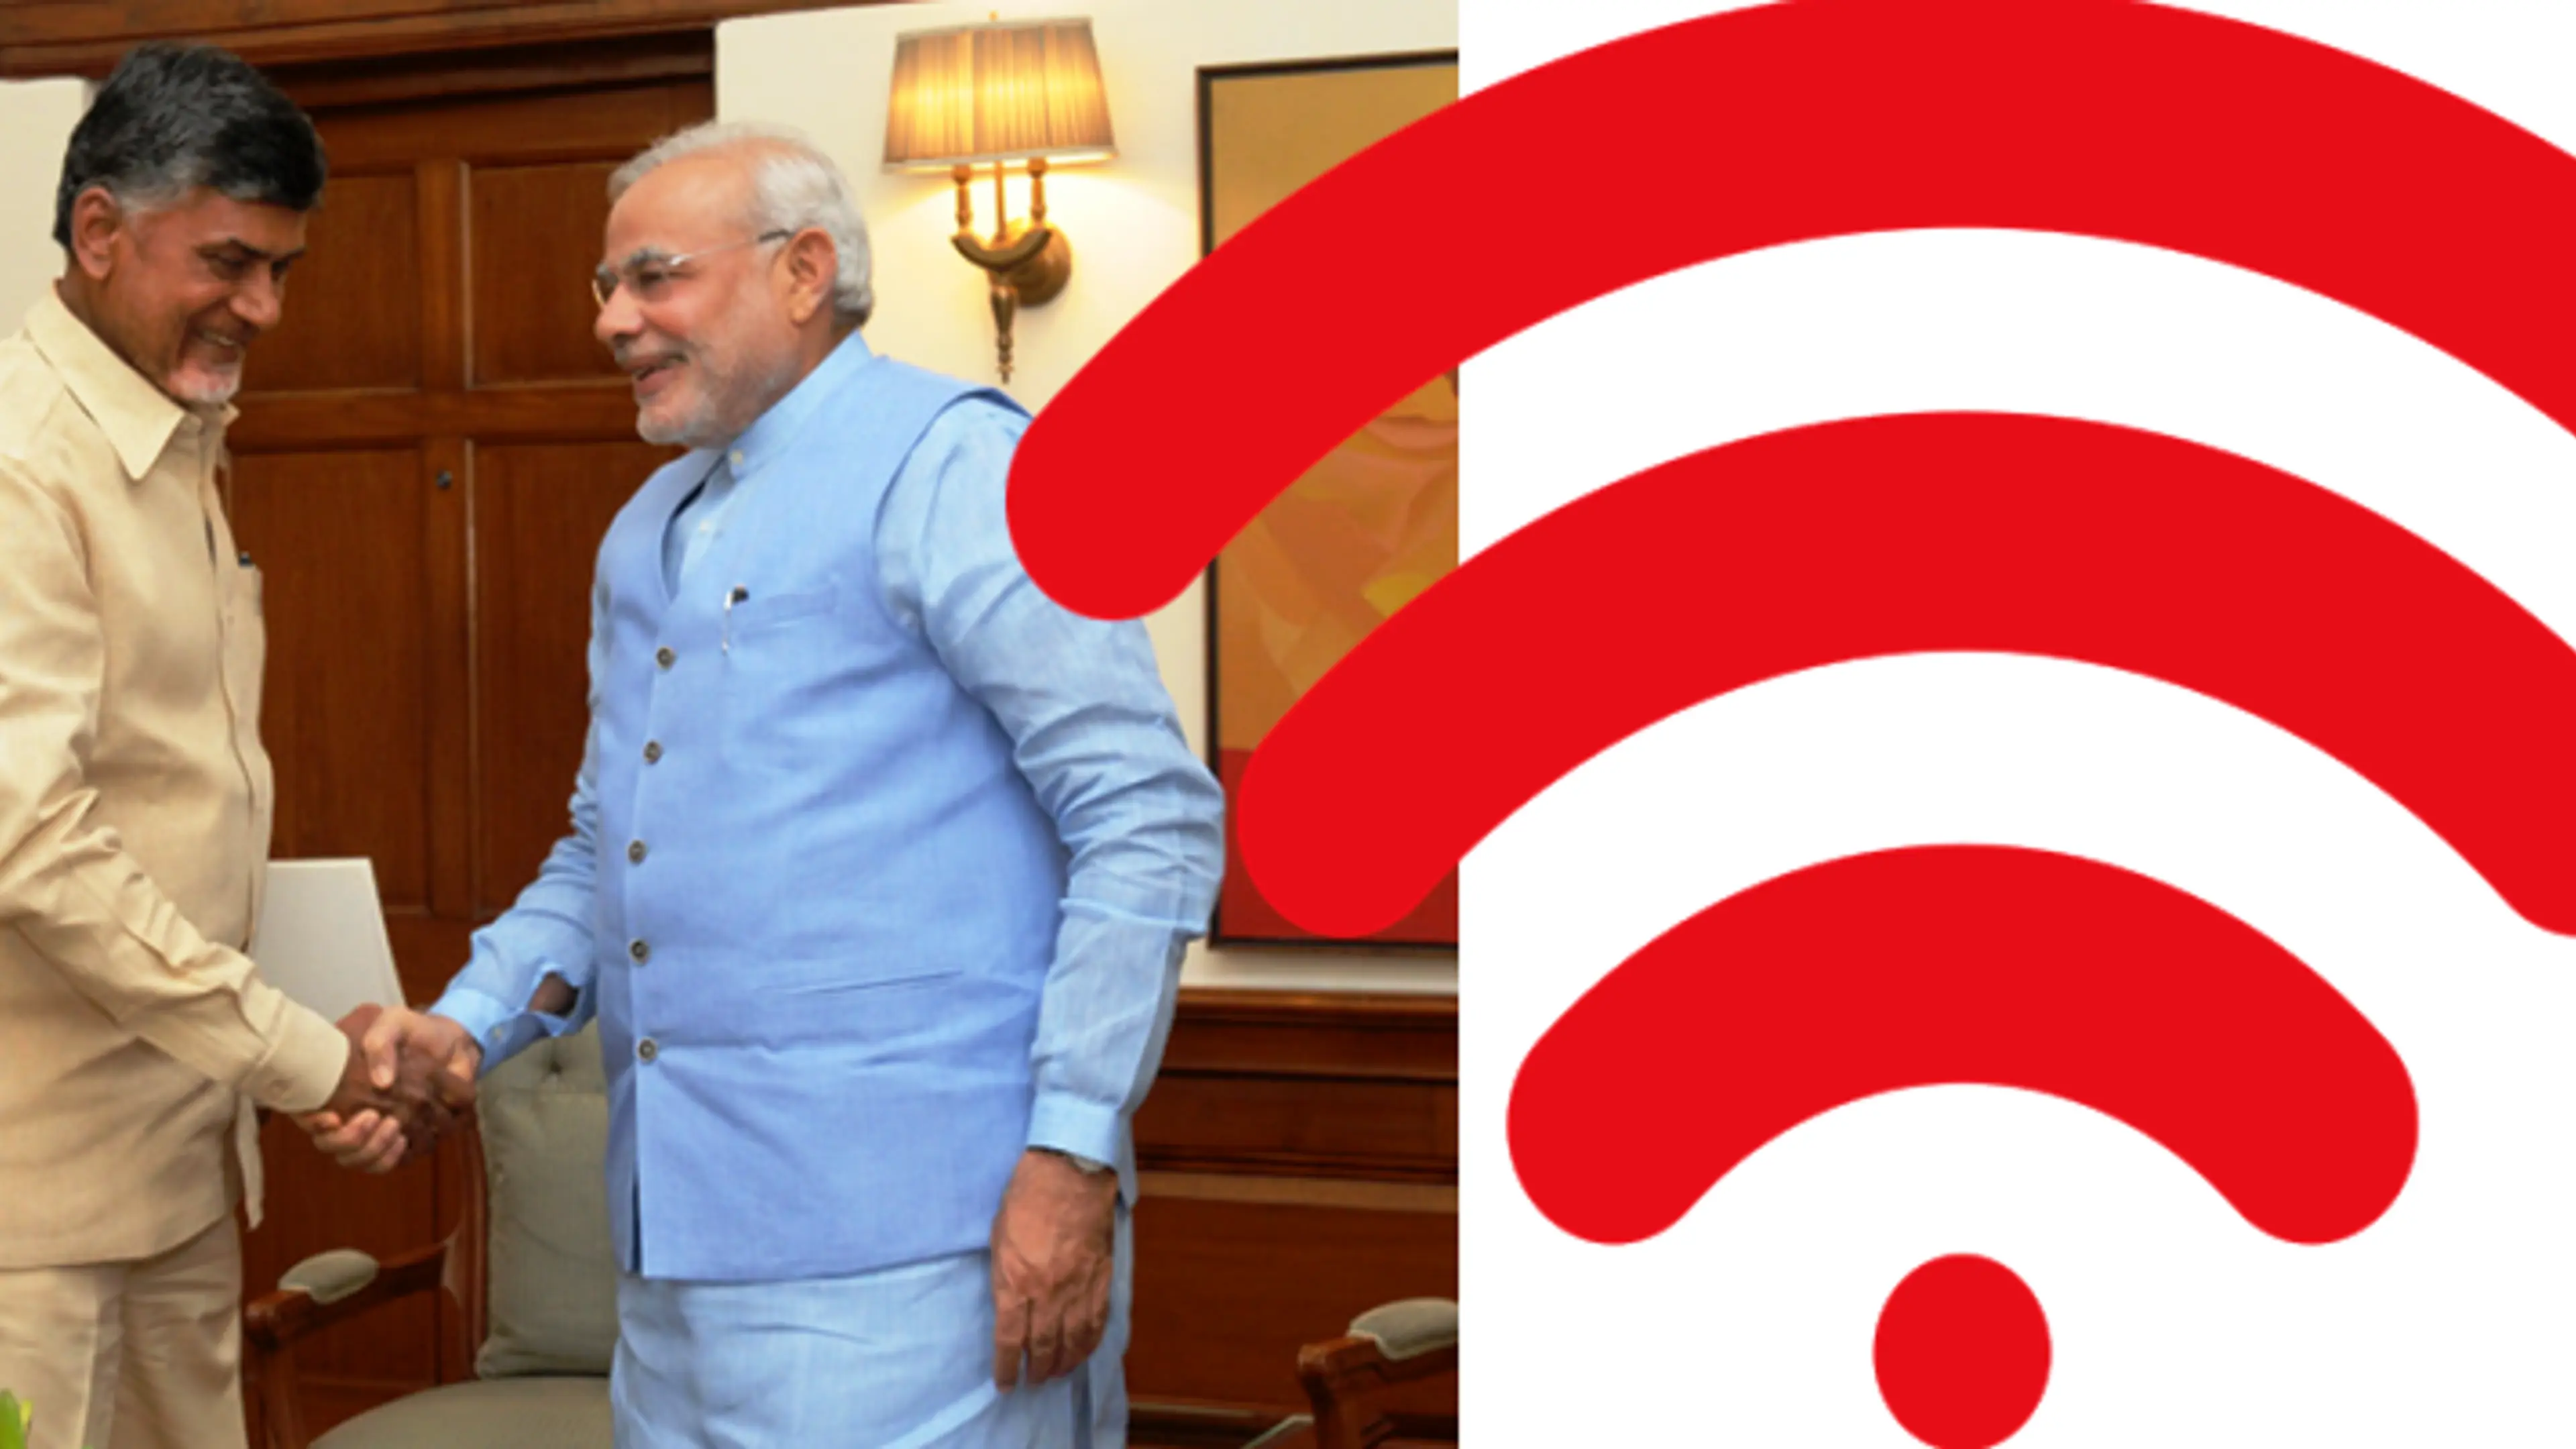 Andhra Pradesh govt takes Digital India to every doorstep, offers affordable internet